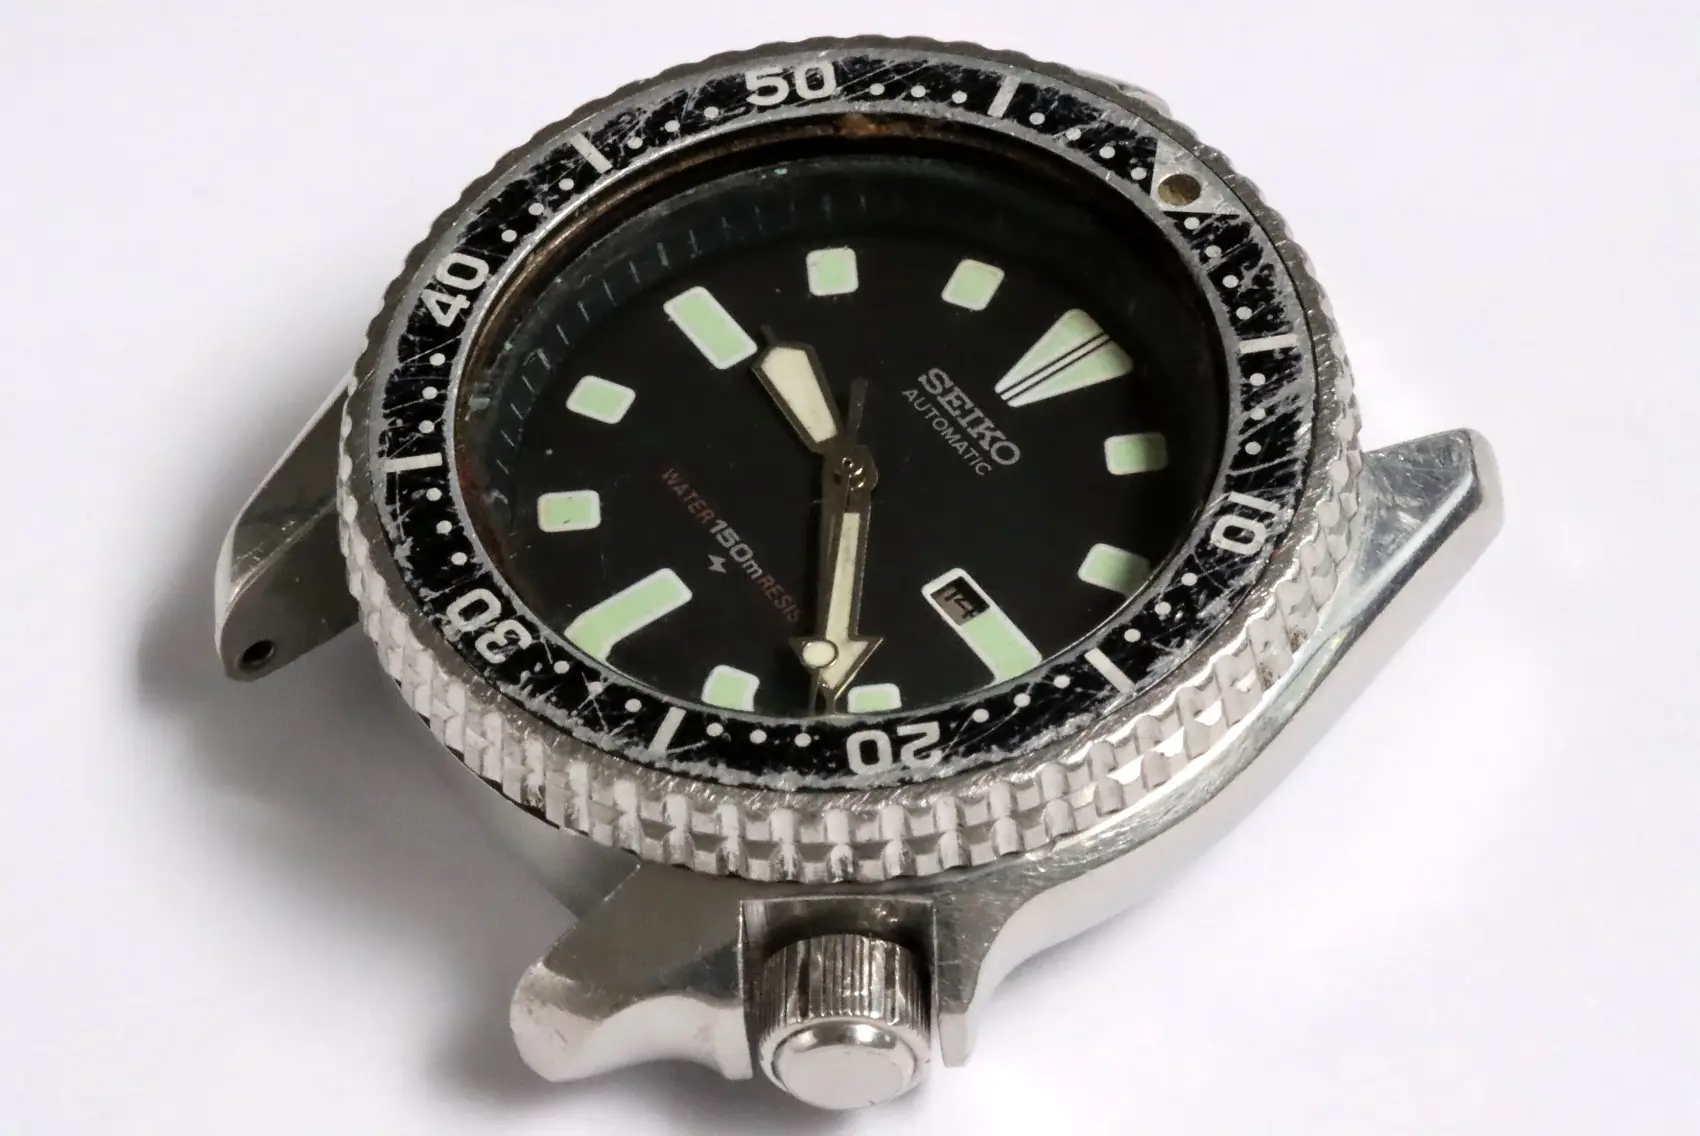 Seiko 4205 midsize divers with case back poor condition